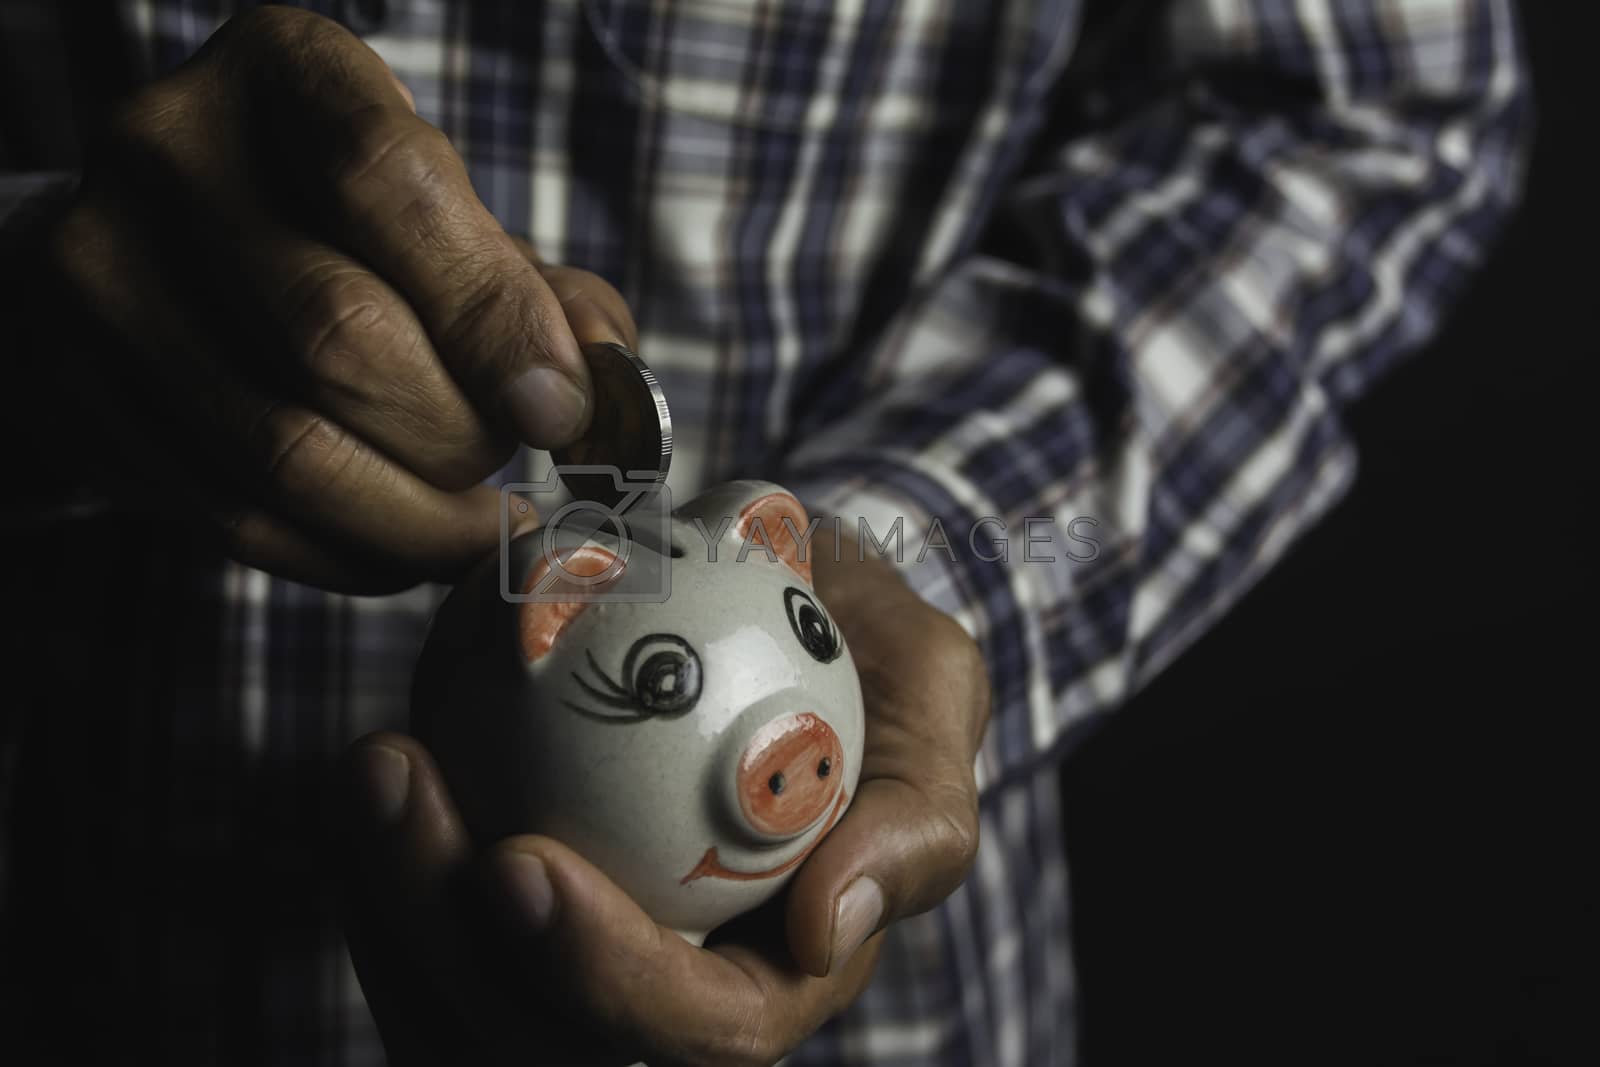 Royalty free image of Saving money concept and hand putting money coin into piggy bank by kirisa99